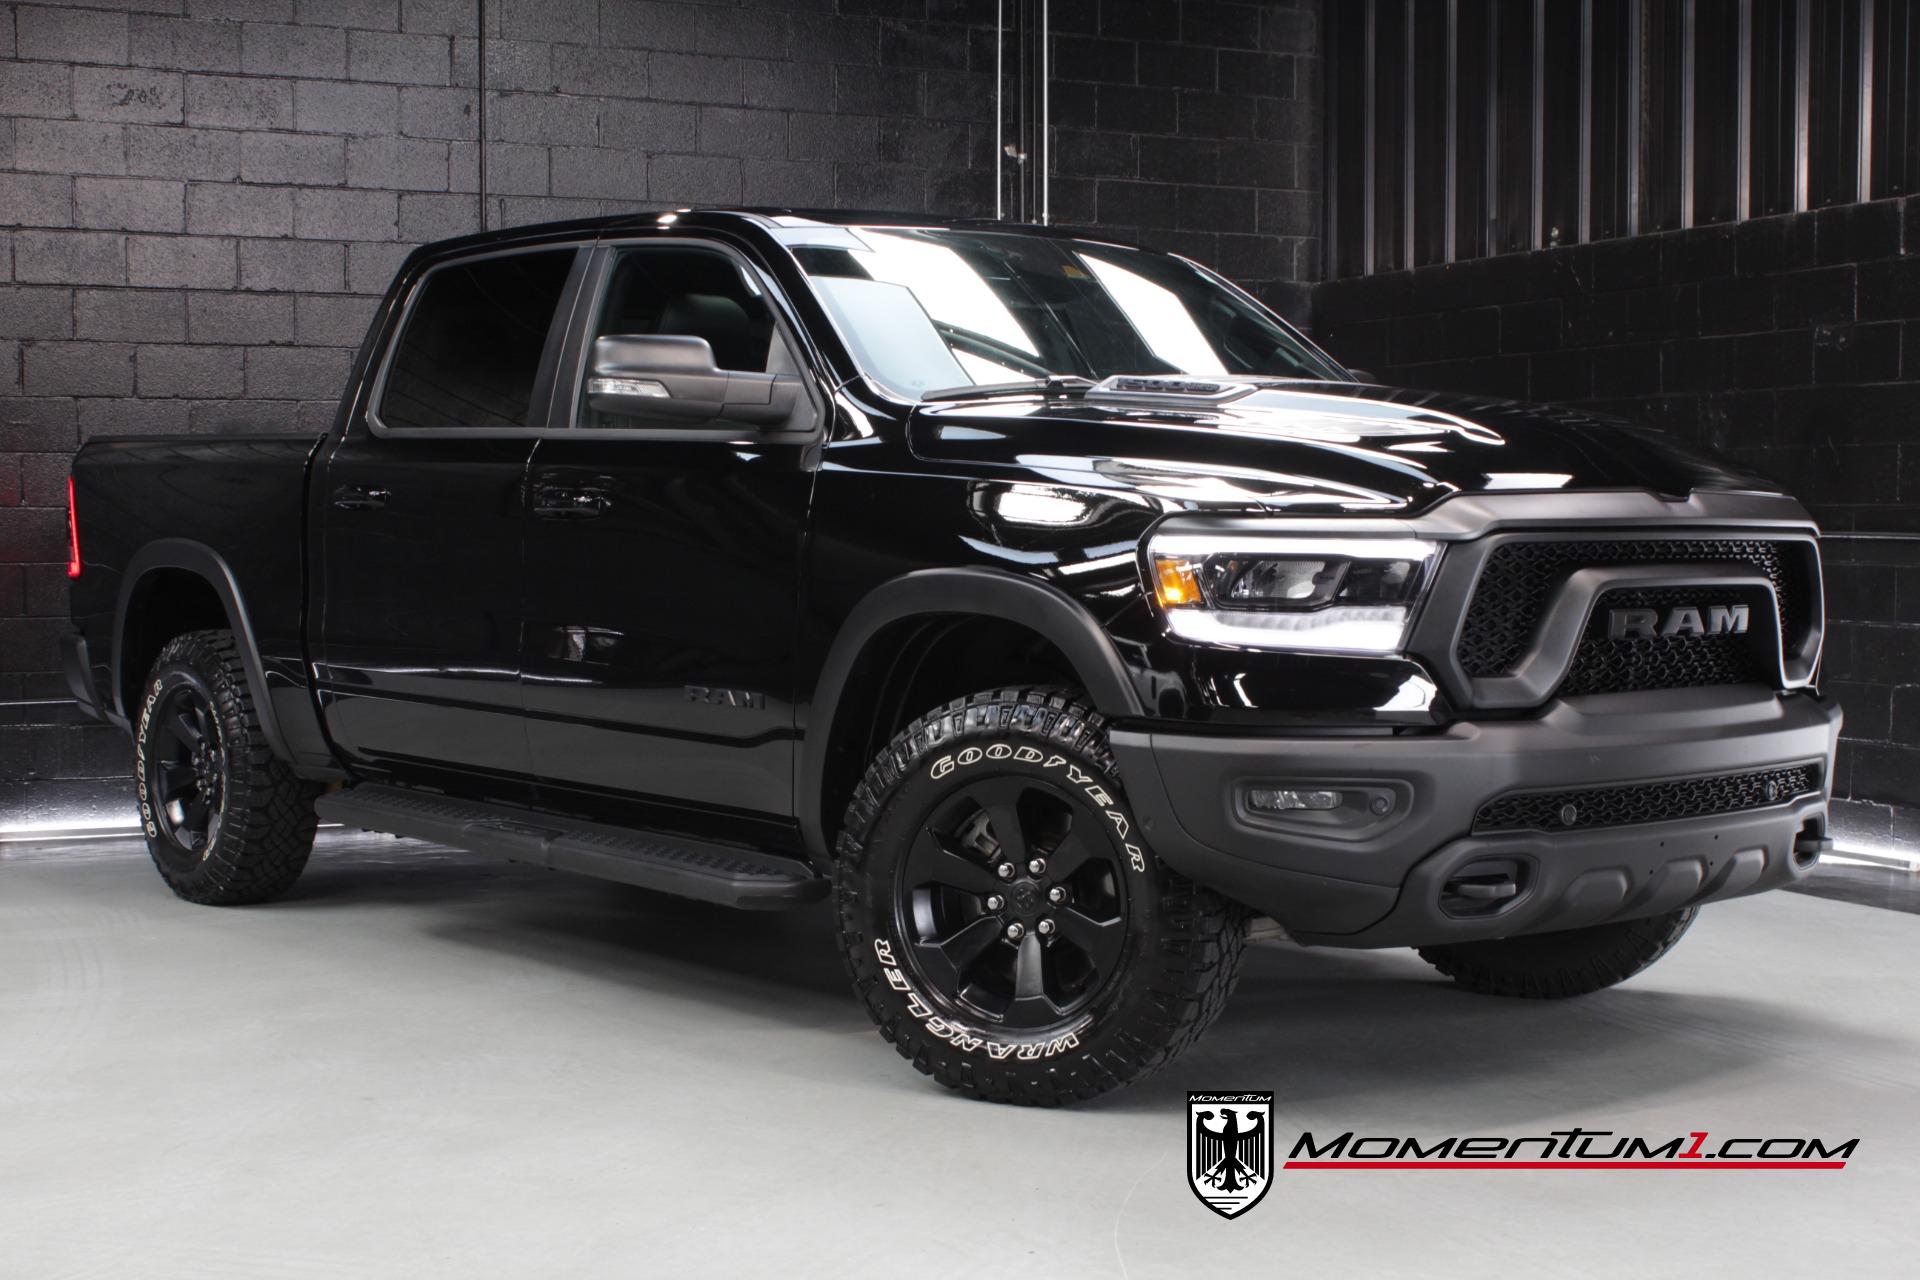 Used 2022 Ram 1500 Rebel Night Edition For Sale (Sold) Momentum